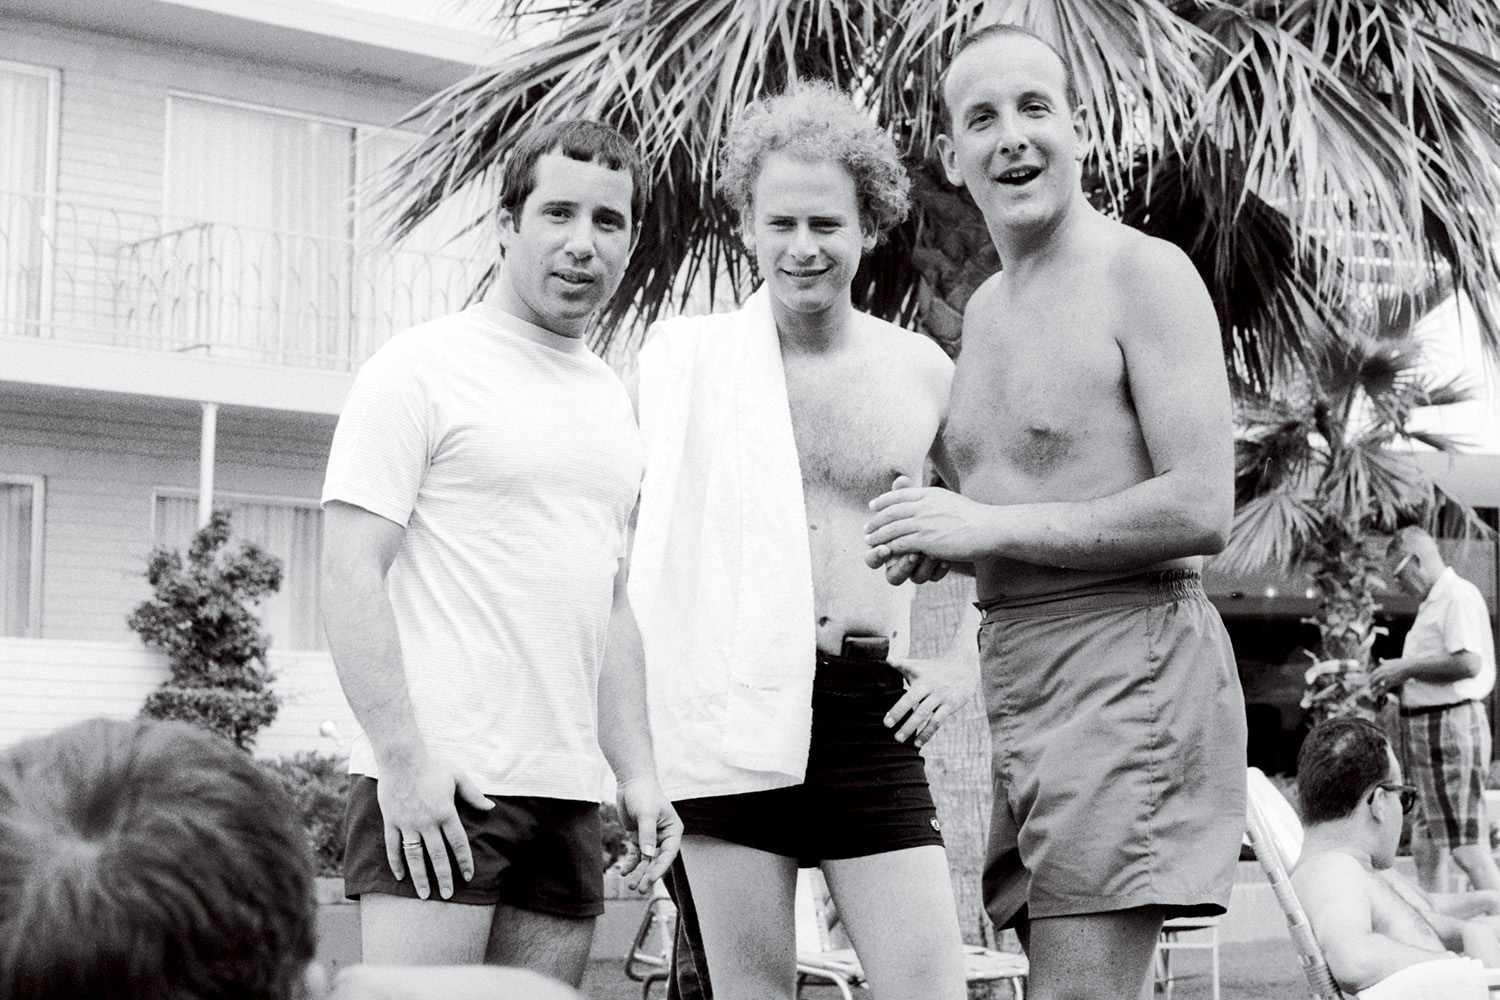 Paul Simon, Art Garfunkel, and Clive Davis Caption reads Three boys from the outer boroughs by the pool at the Columbia Records convention, 1970